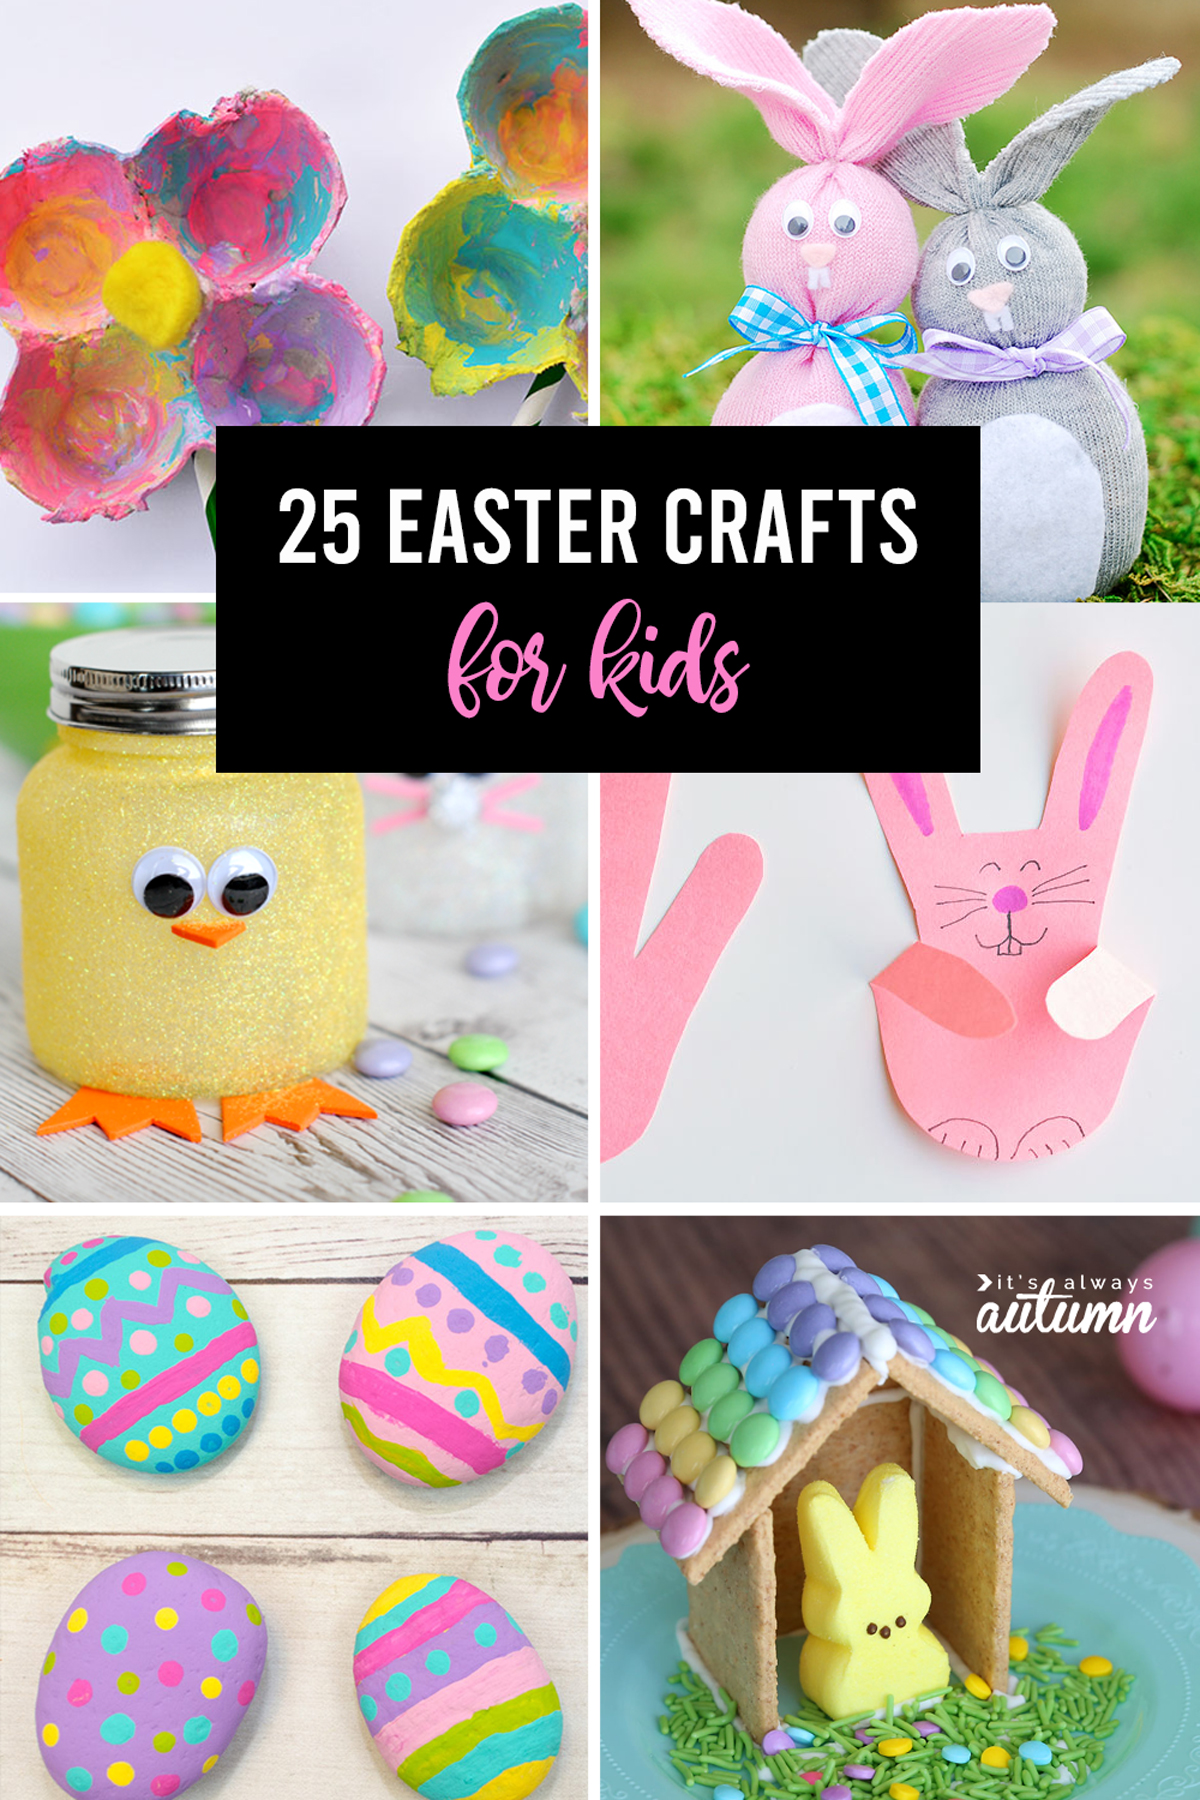 21 Super Cute Easter Crafts For Kids - Playtivities